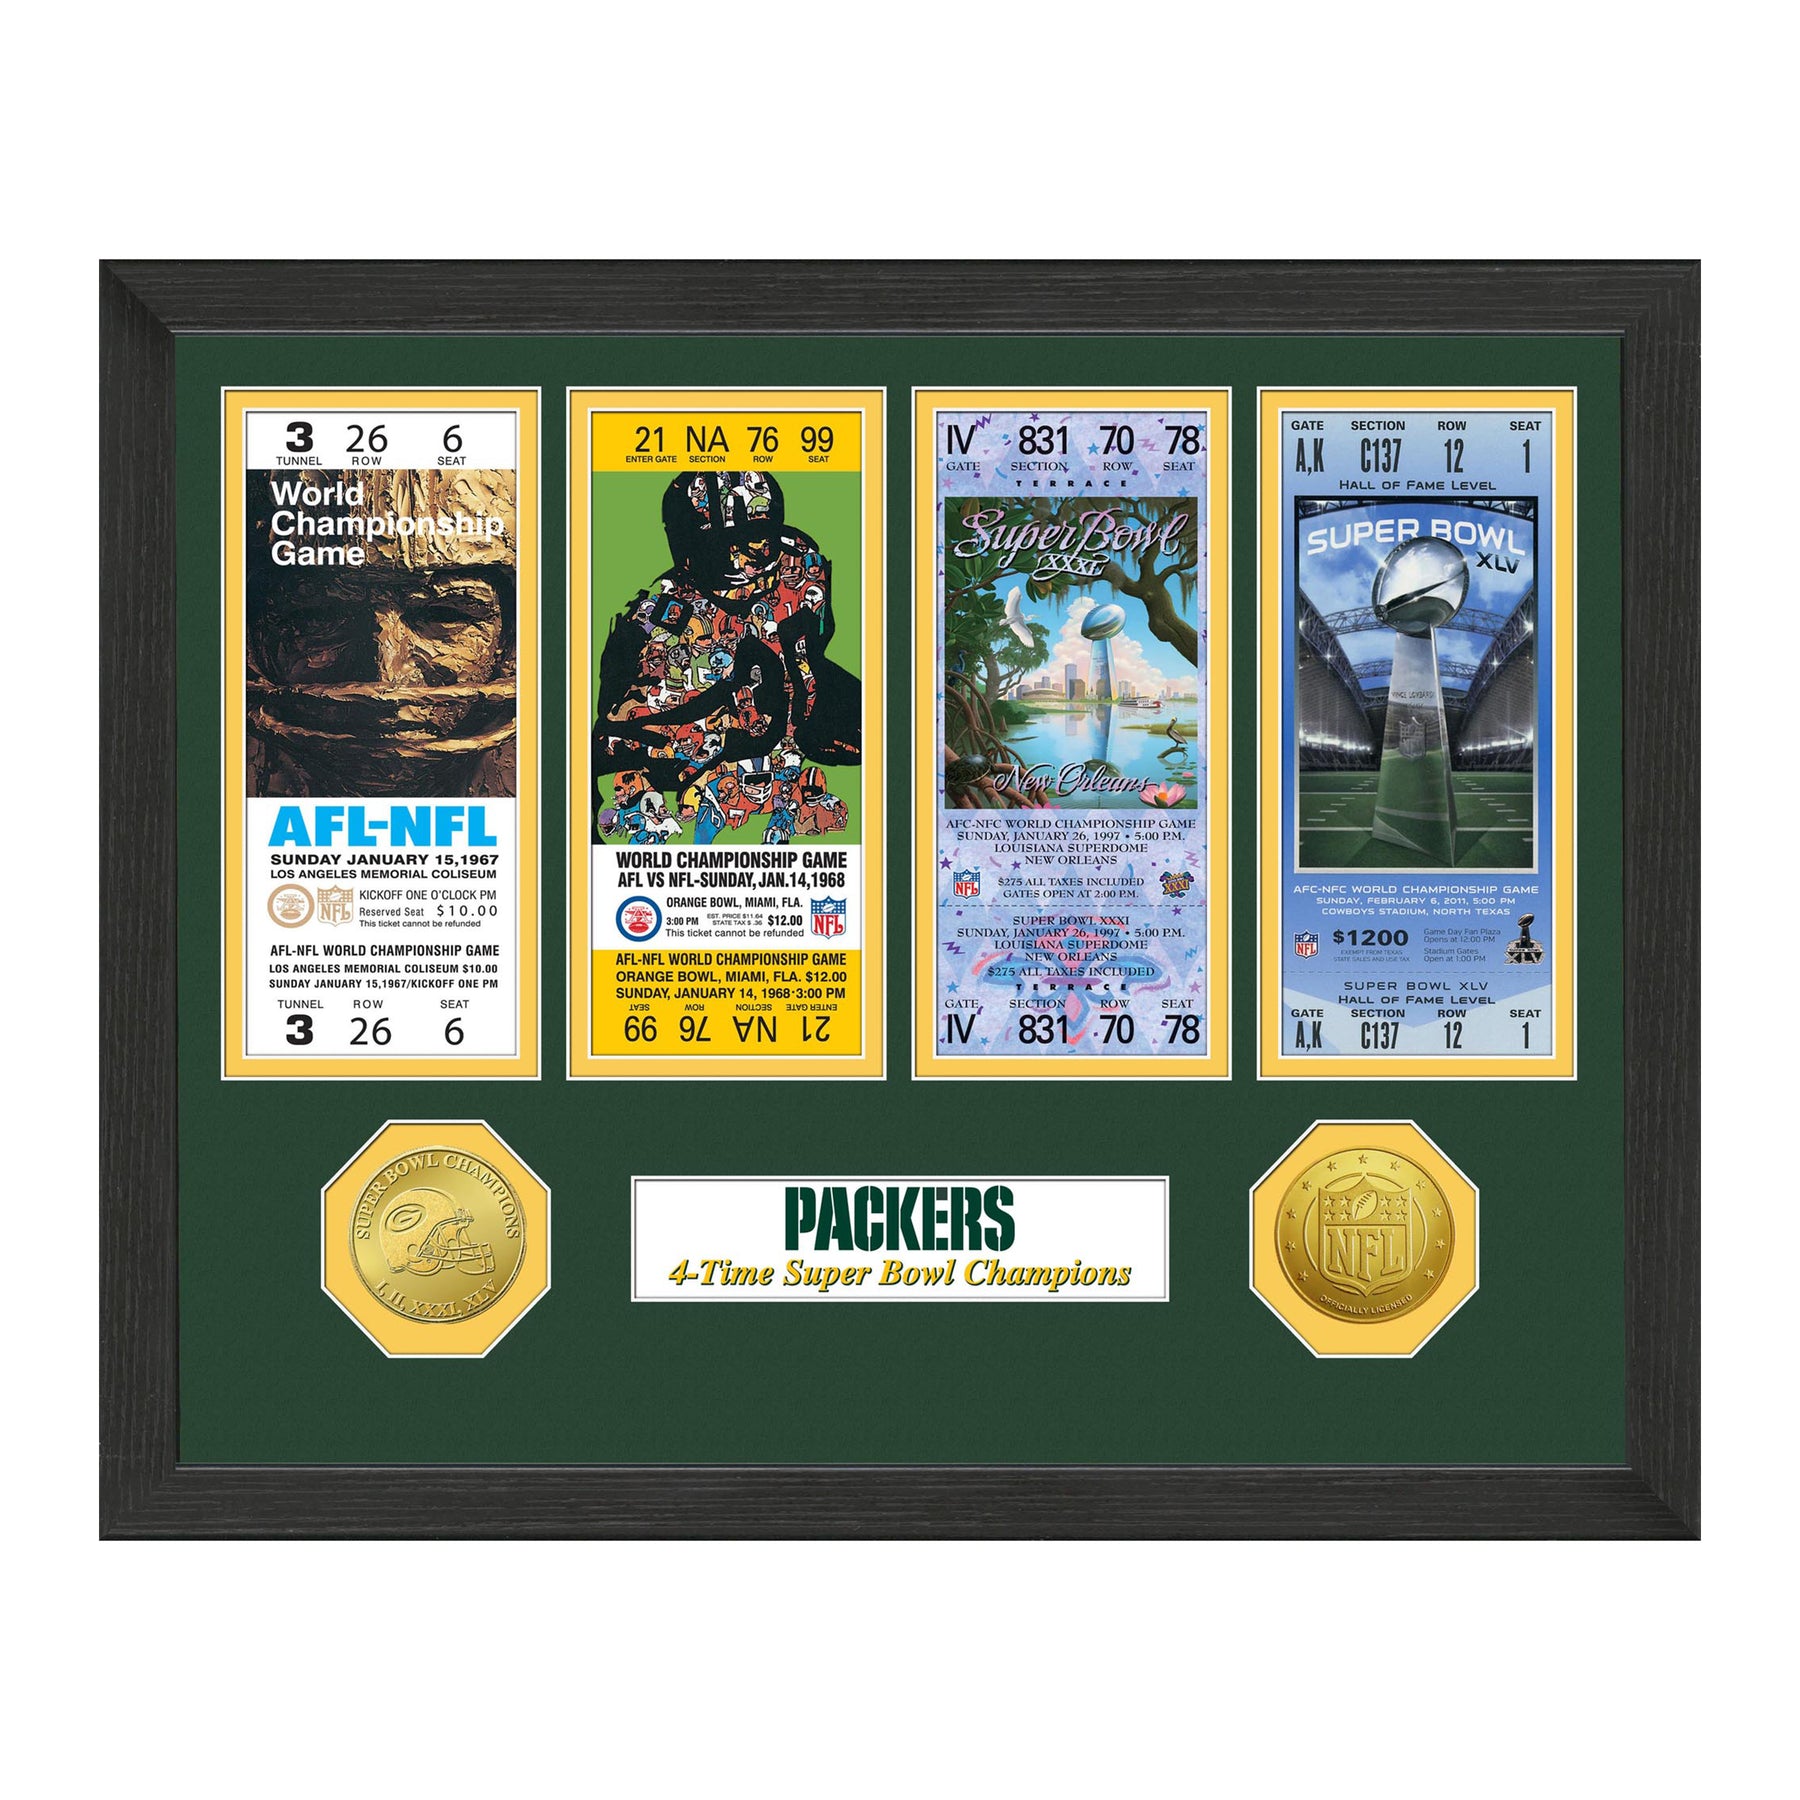 Green Bay Packers Super Bowl Champions Ticket Collections Frame